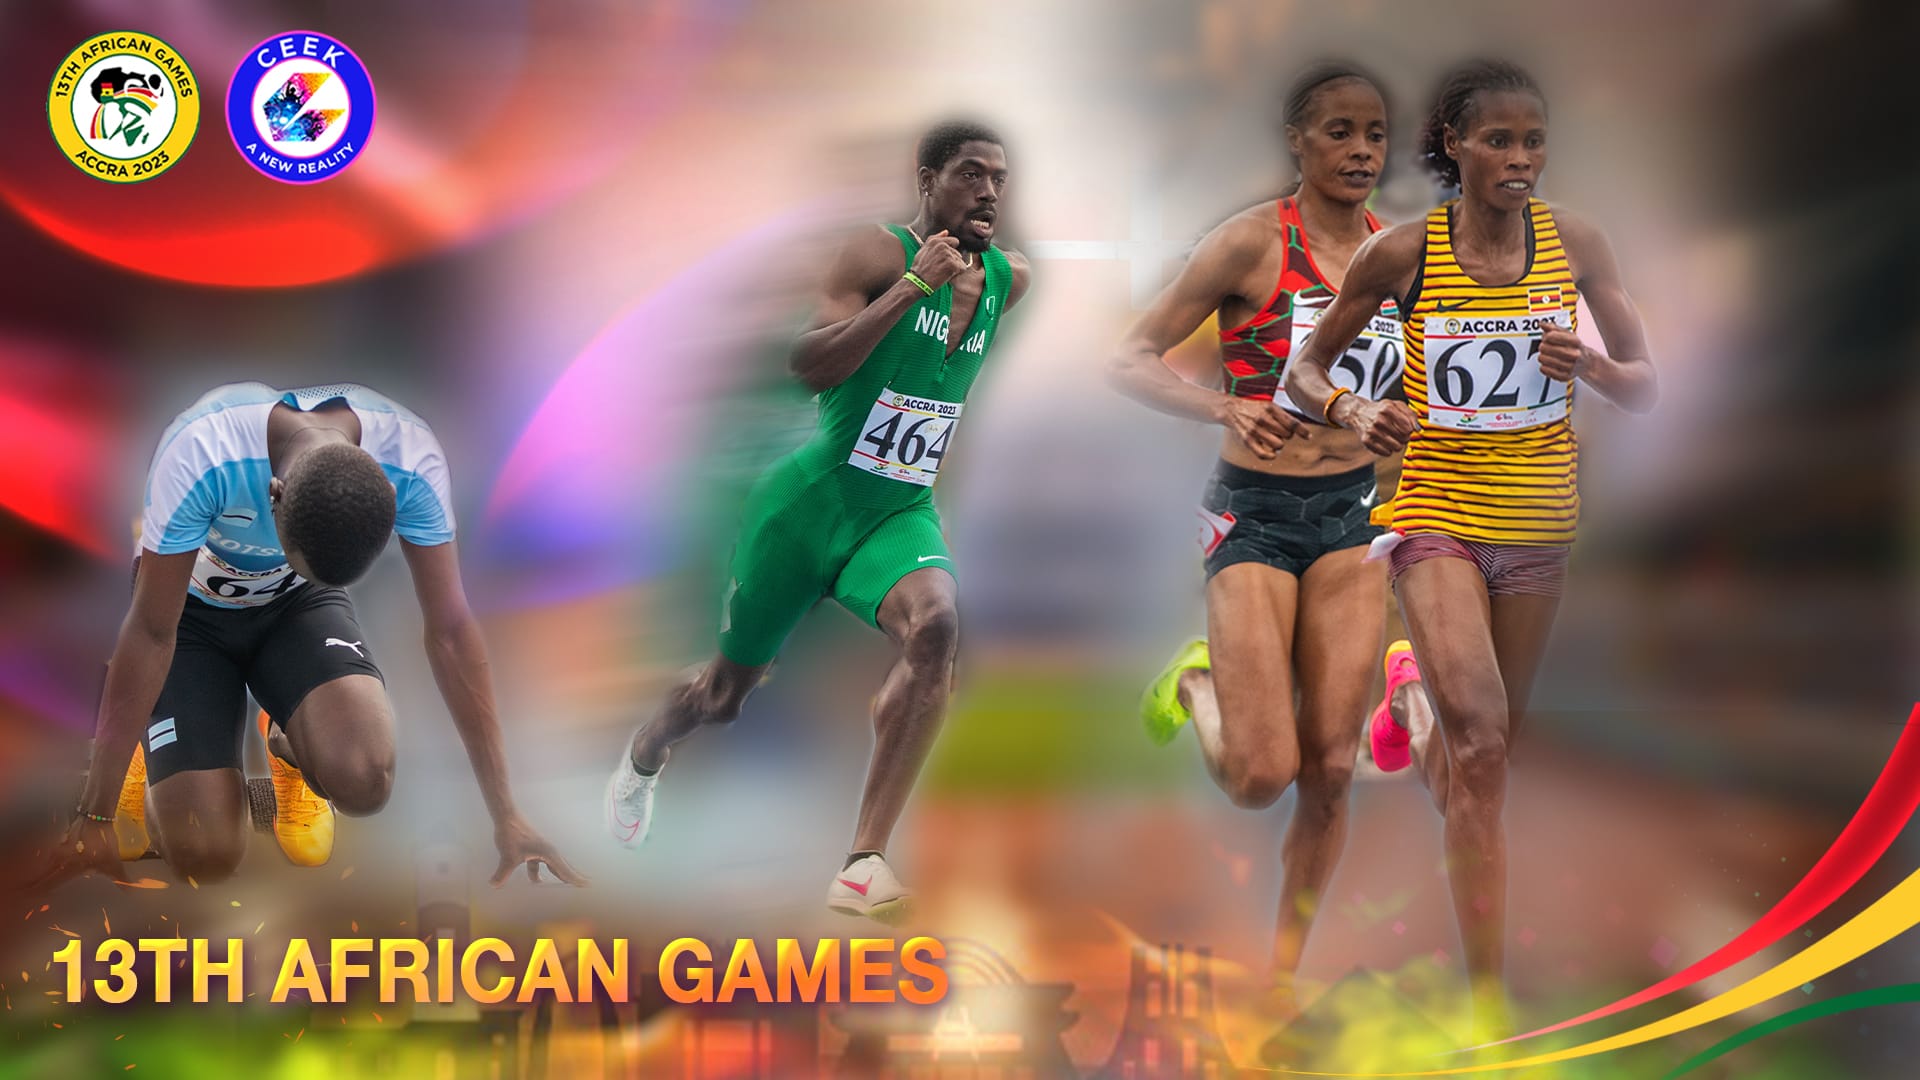  African Games African Games Accra